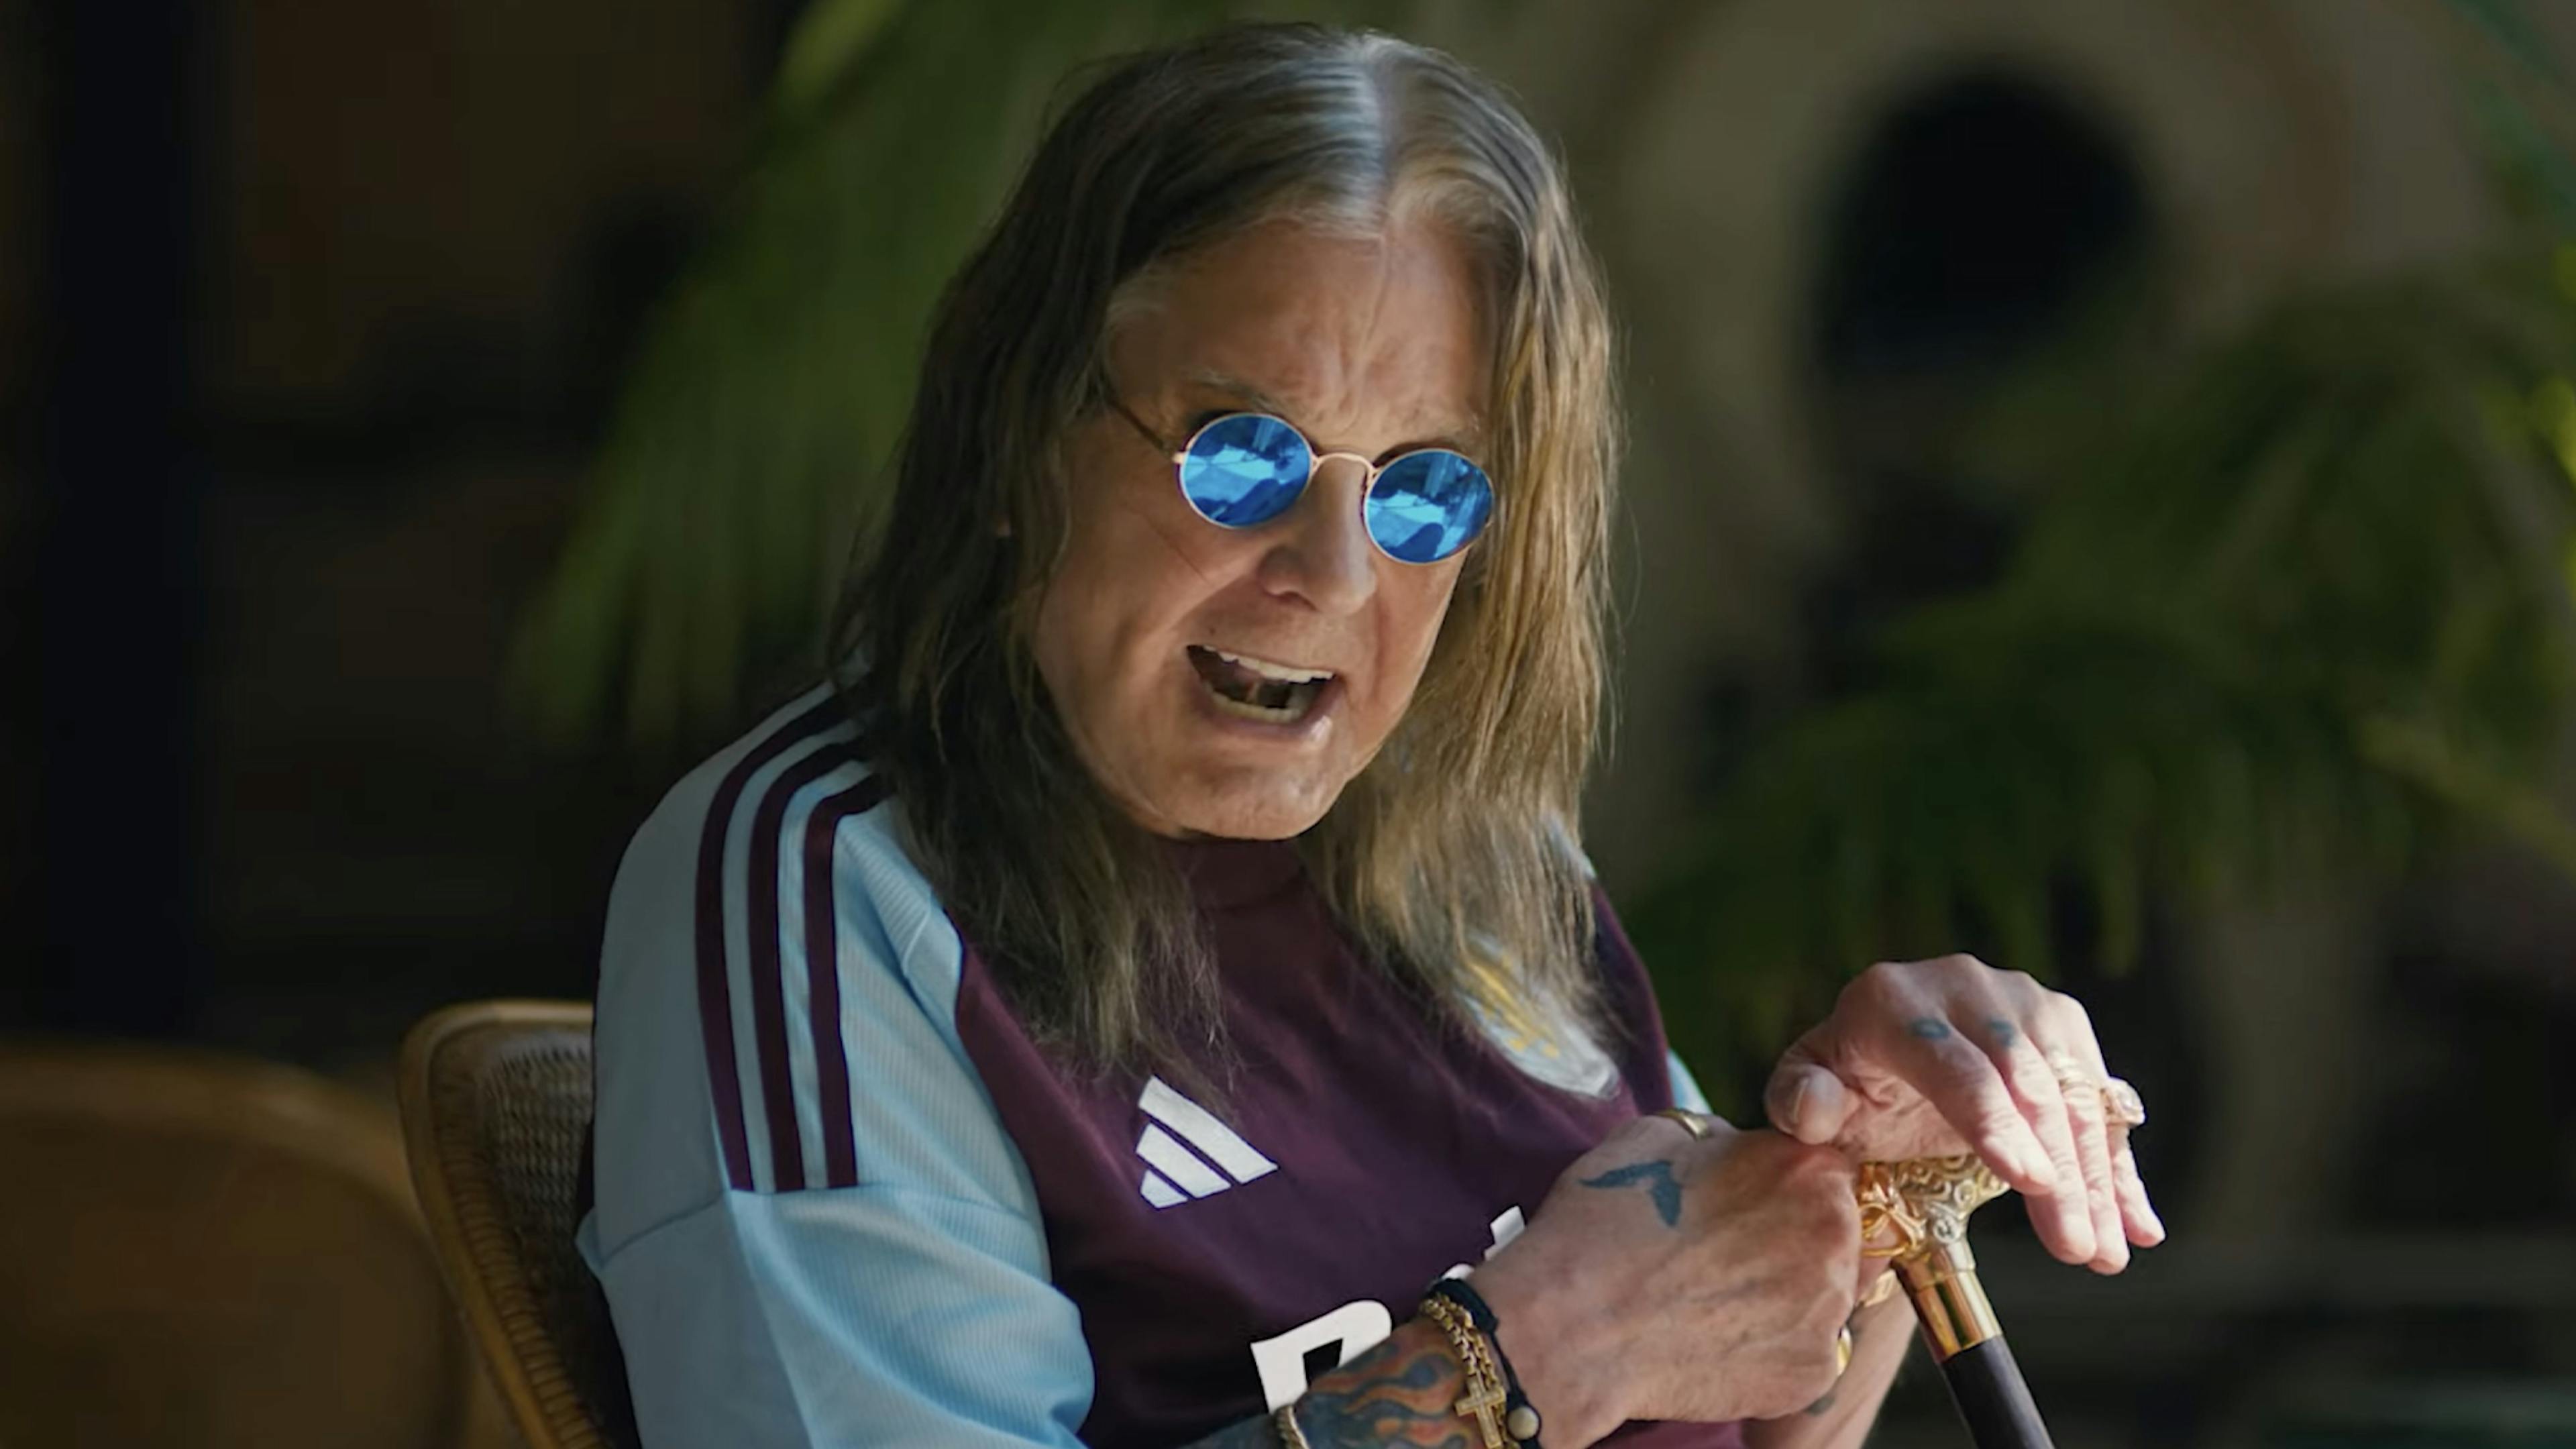 Ozzy and Geezer Butler star in the trailer for Aston Villa’s new home kit